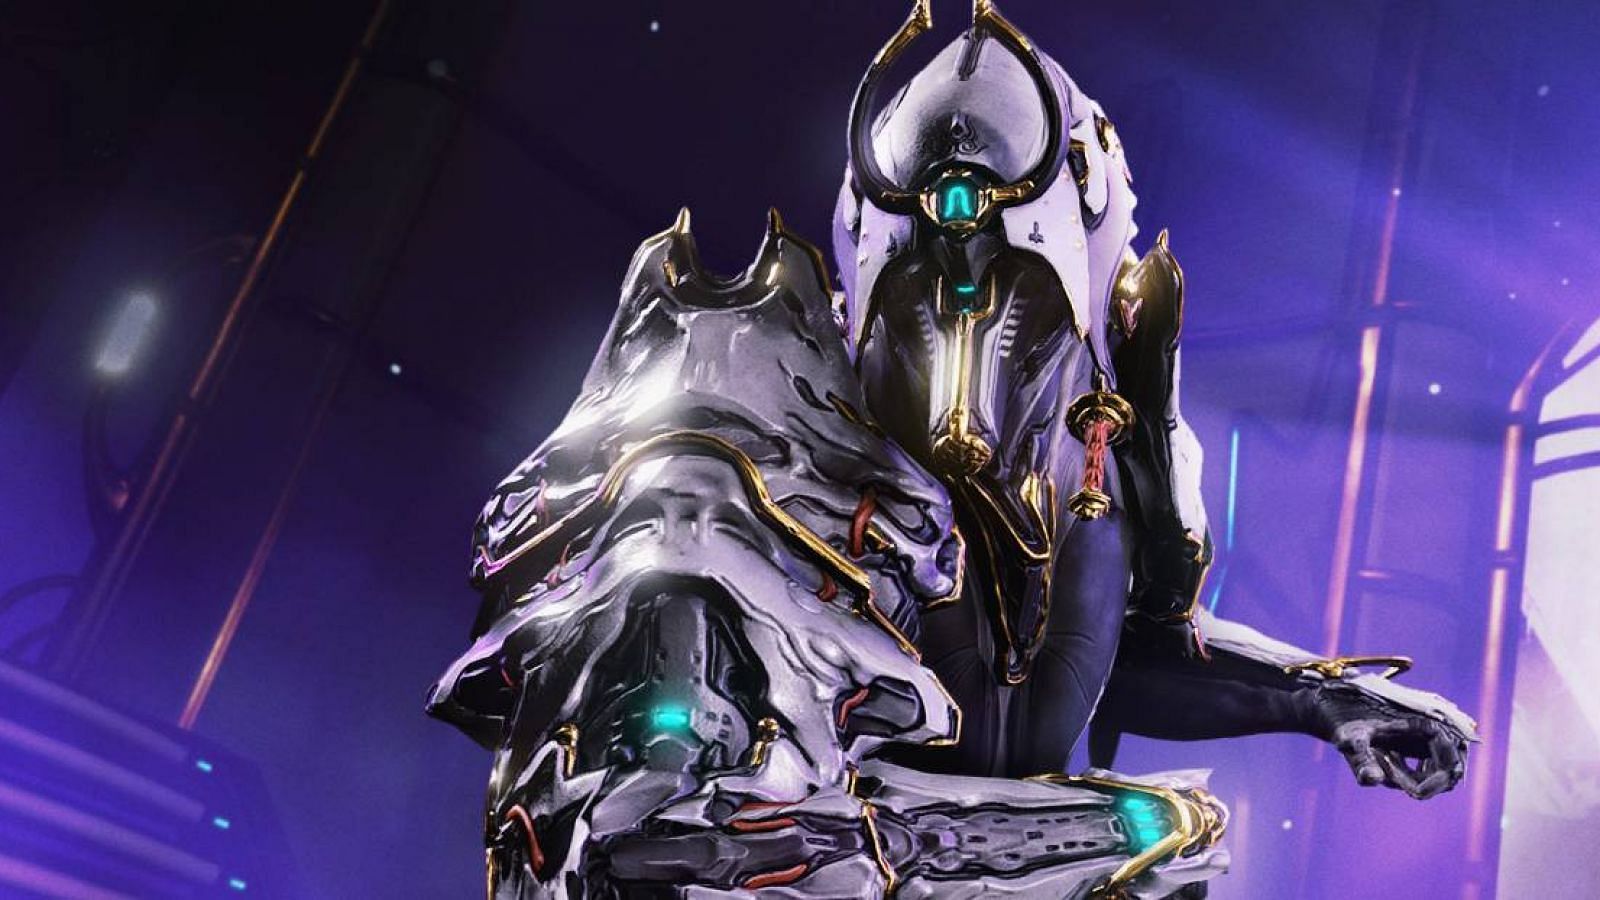 The Ash Warframe has a high skill ceiling due to his low defensive stats (Image via Digital Extremes)